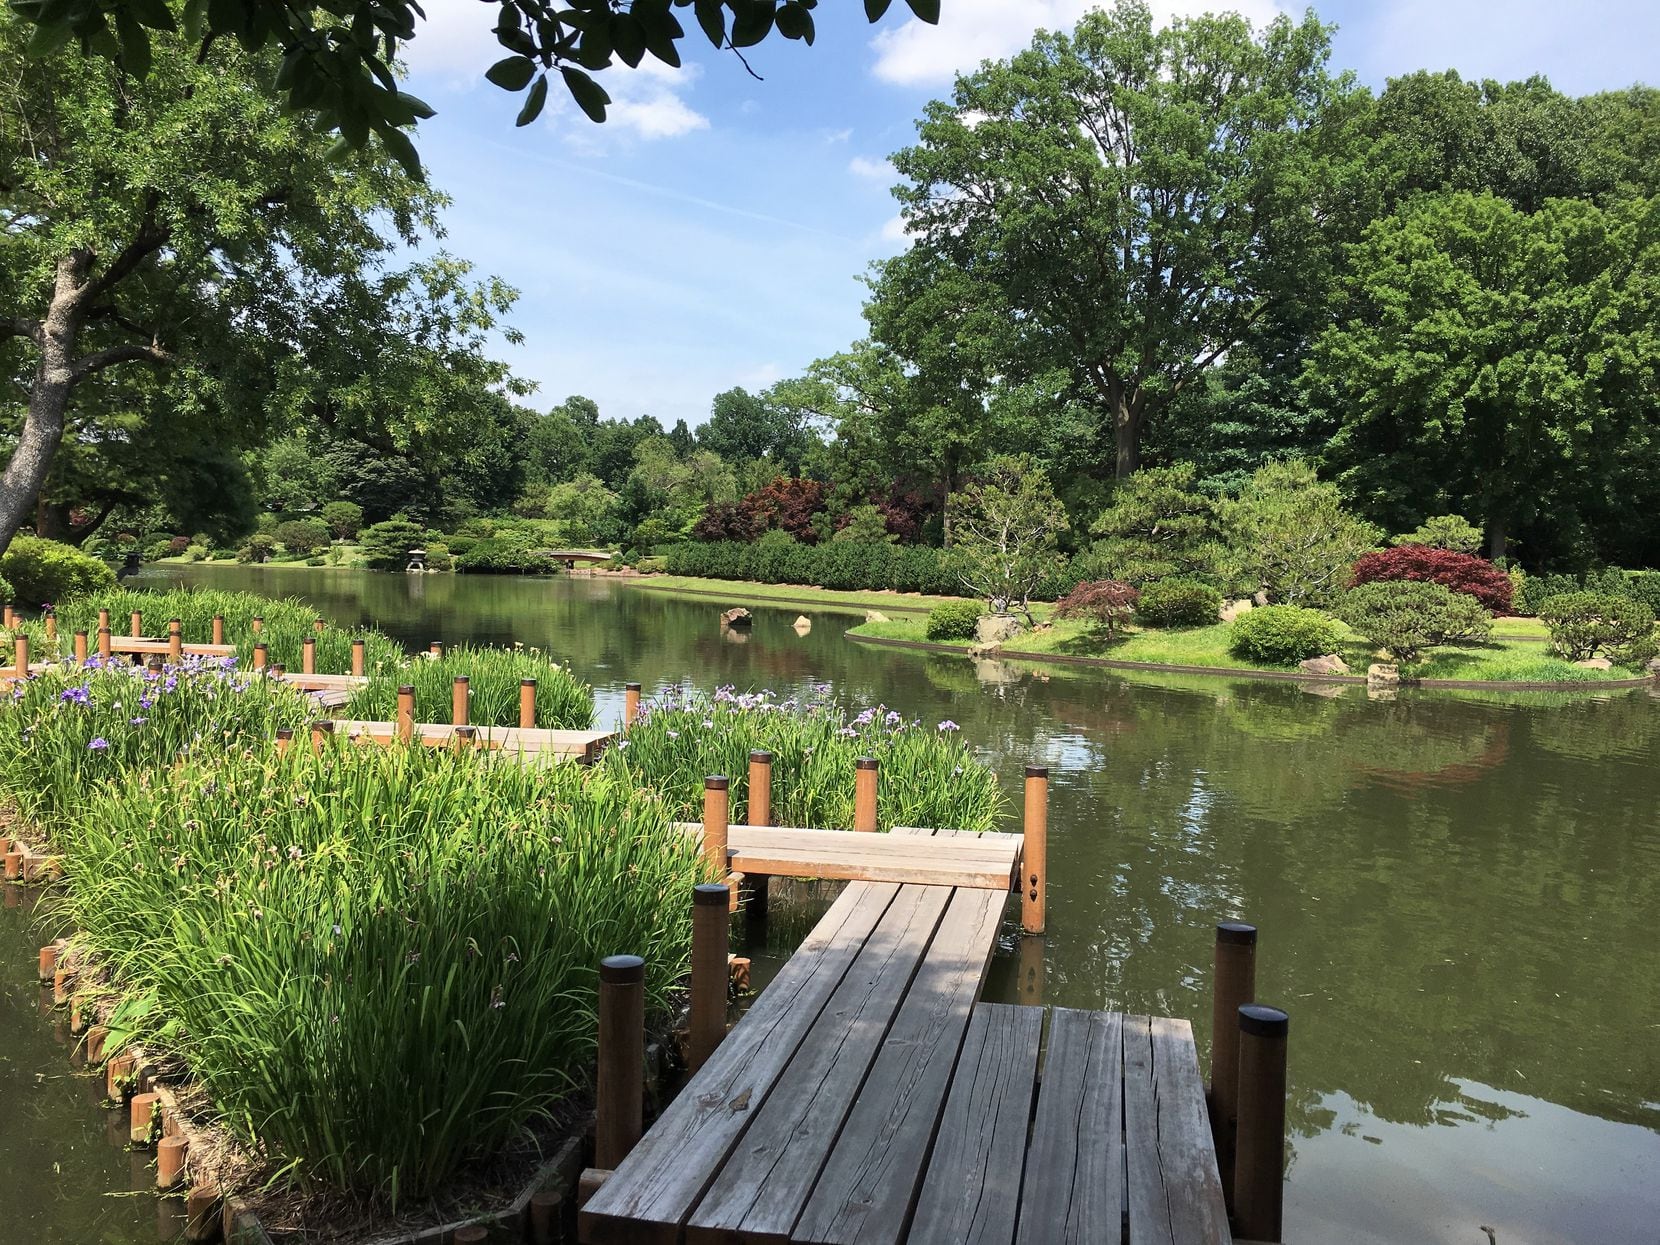 The Japanese Garden at Missouri Botanical Garden may be the most peaceful spot on earth. 